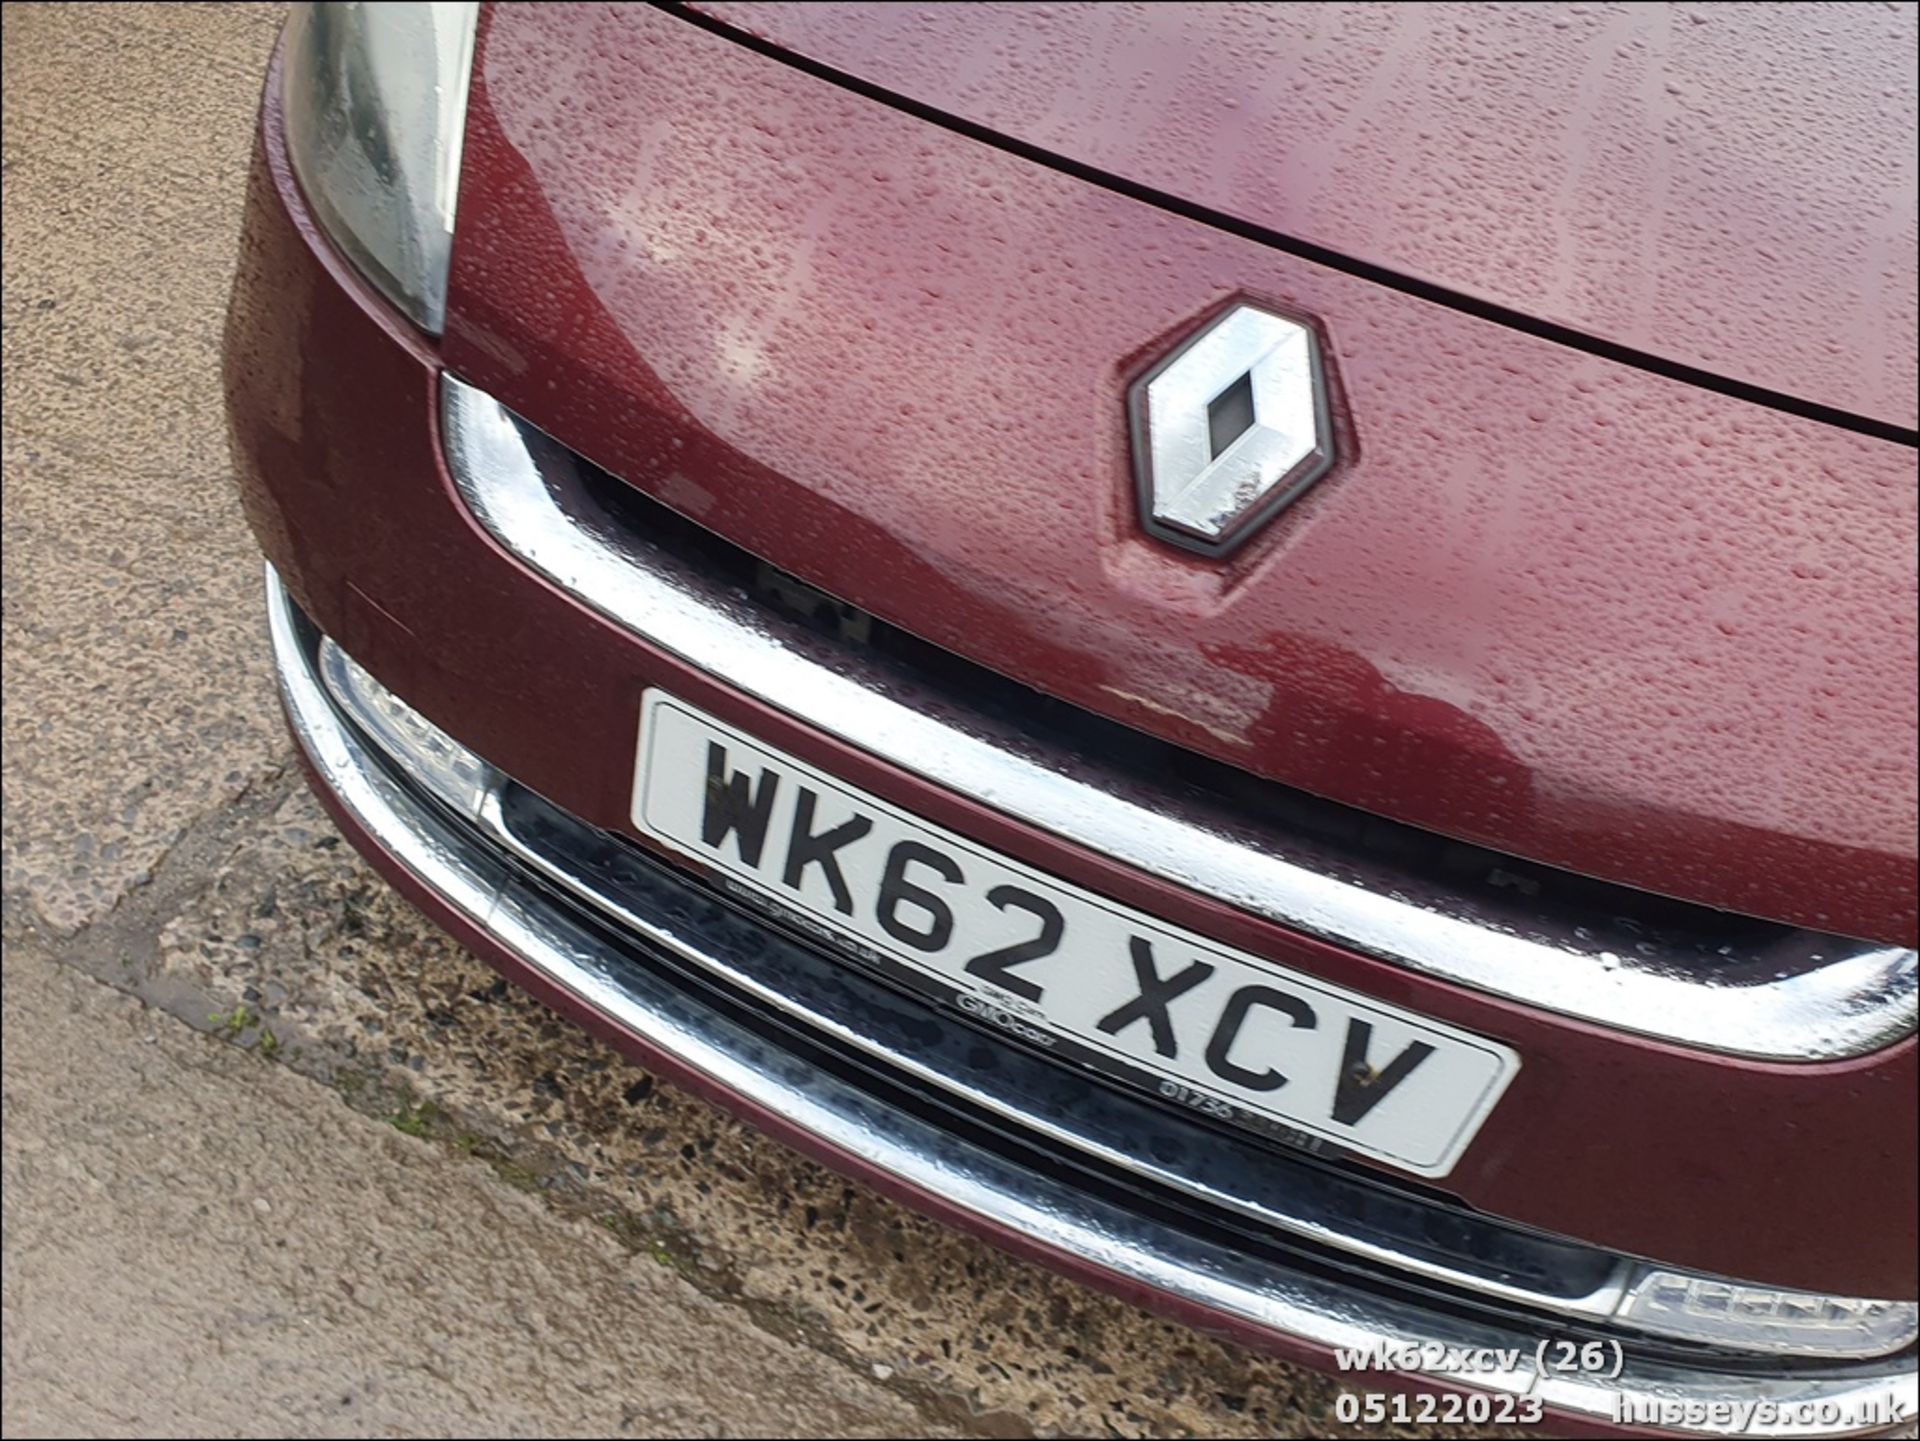 12/62 RENAULT G SCENIC D-QUETTLUXE NRG - 1598cc 5dr MPV (Red) - Image 27 of 53